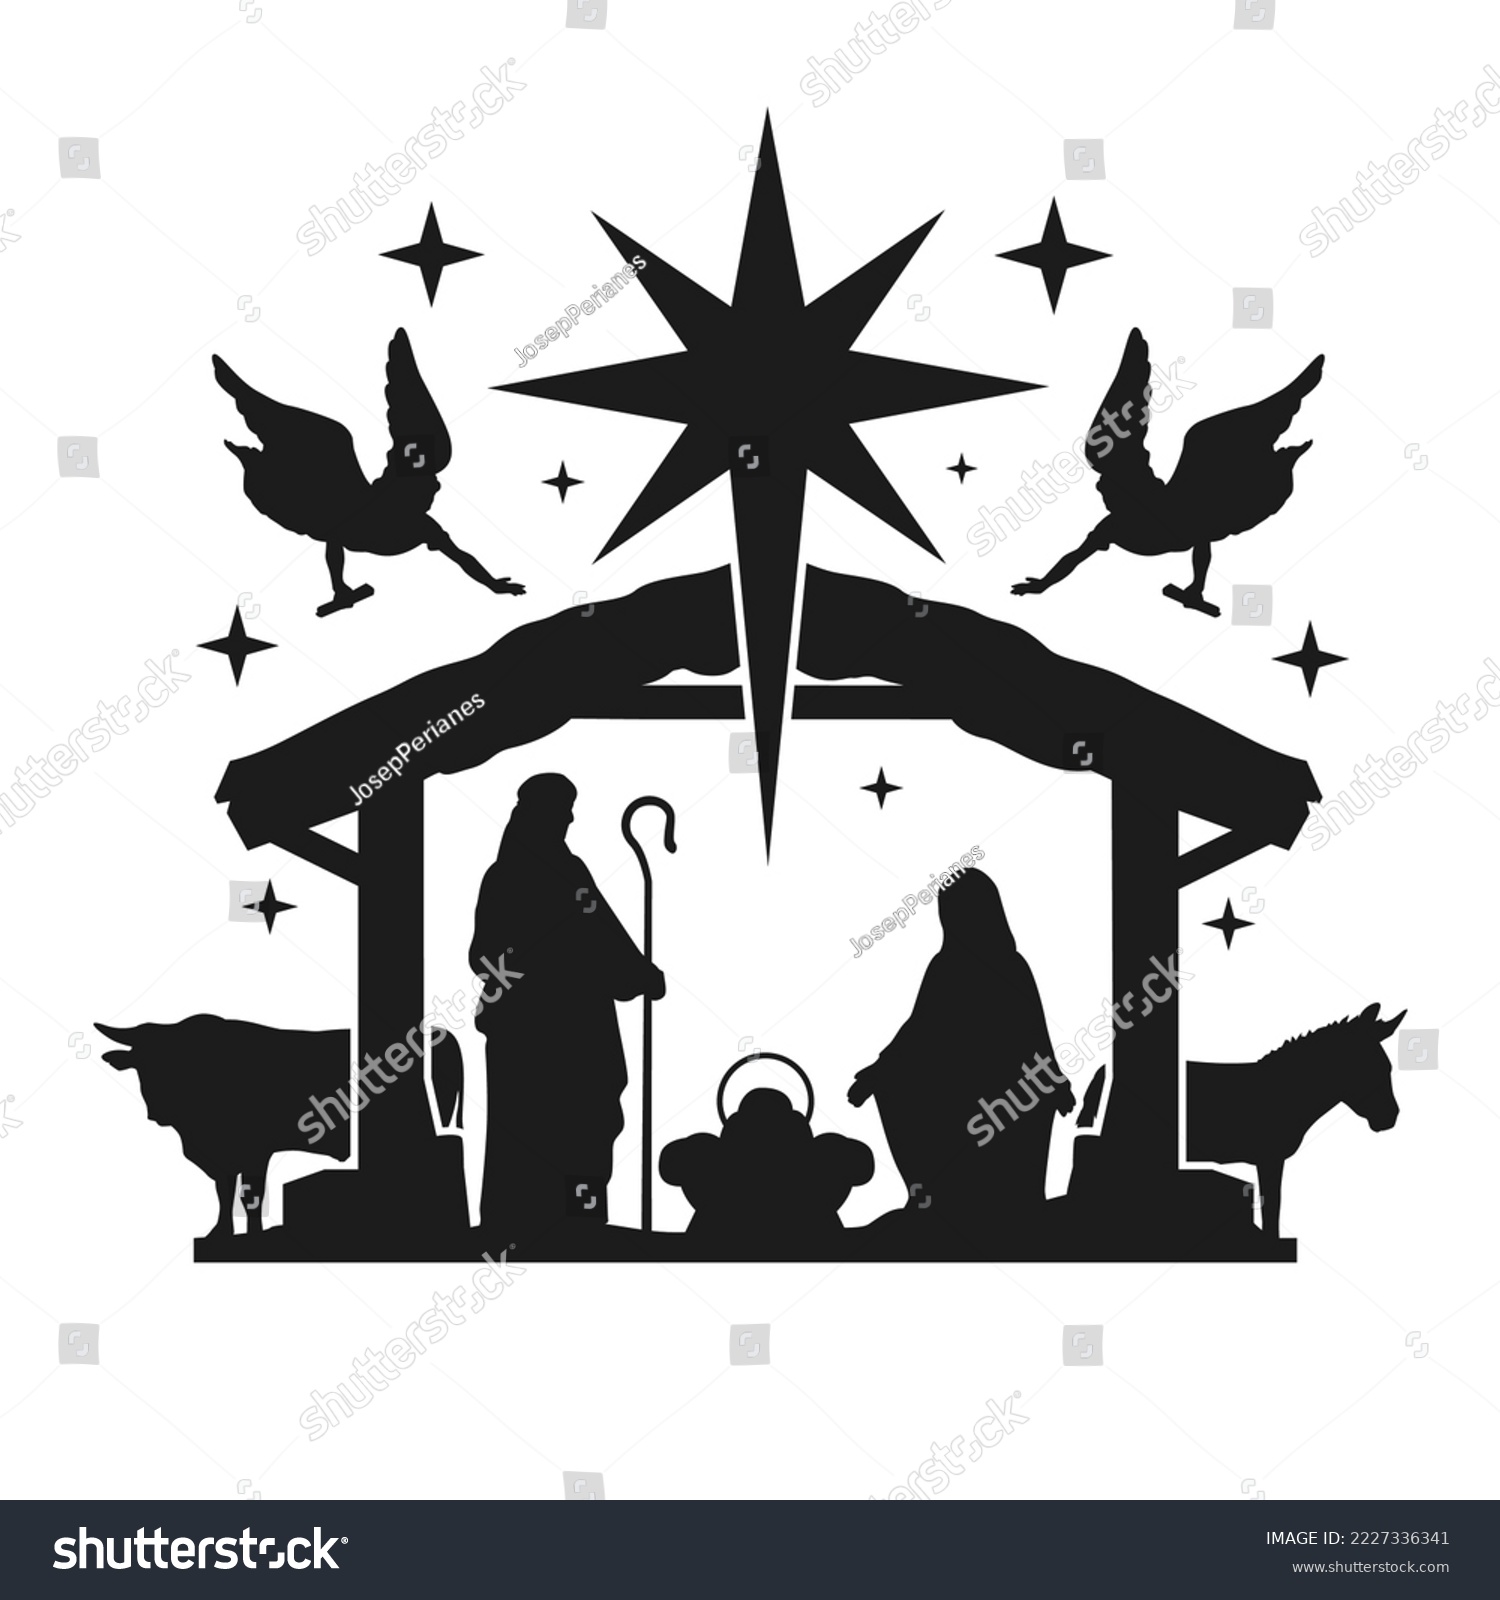 SVG of Nativity Scene Silhouette. Holidays Christmas Religion. Holly Night Characters. Cut File Design. Vector Clip Art. svg